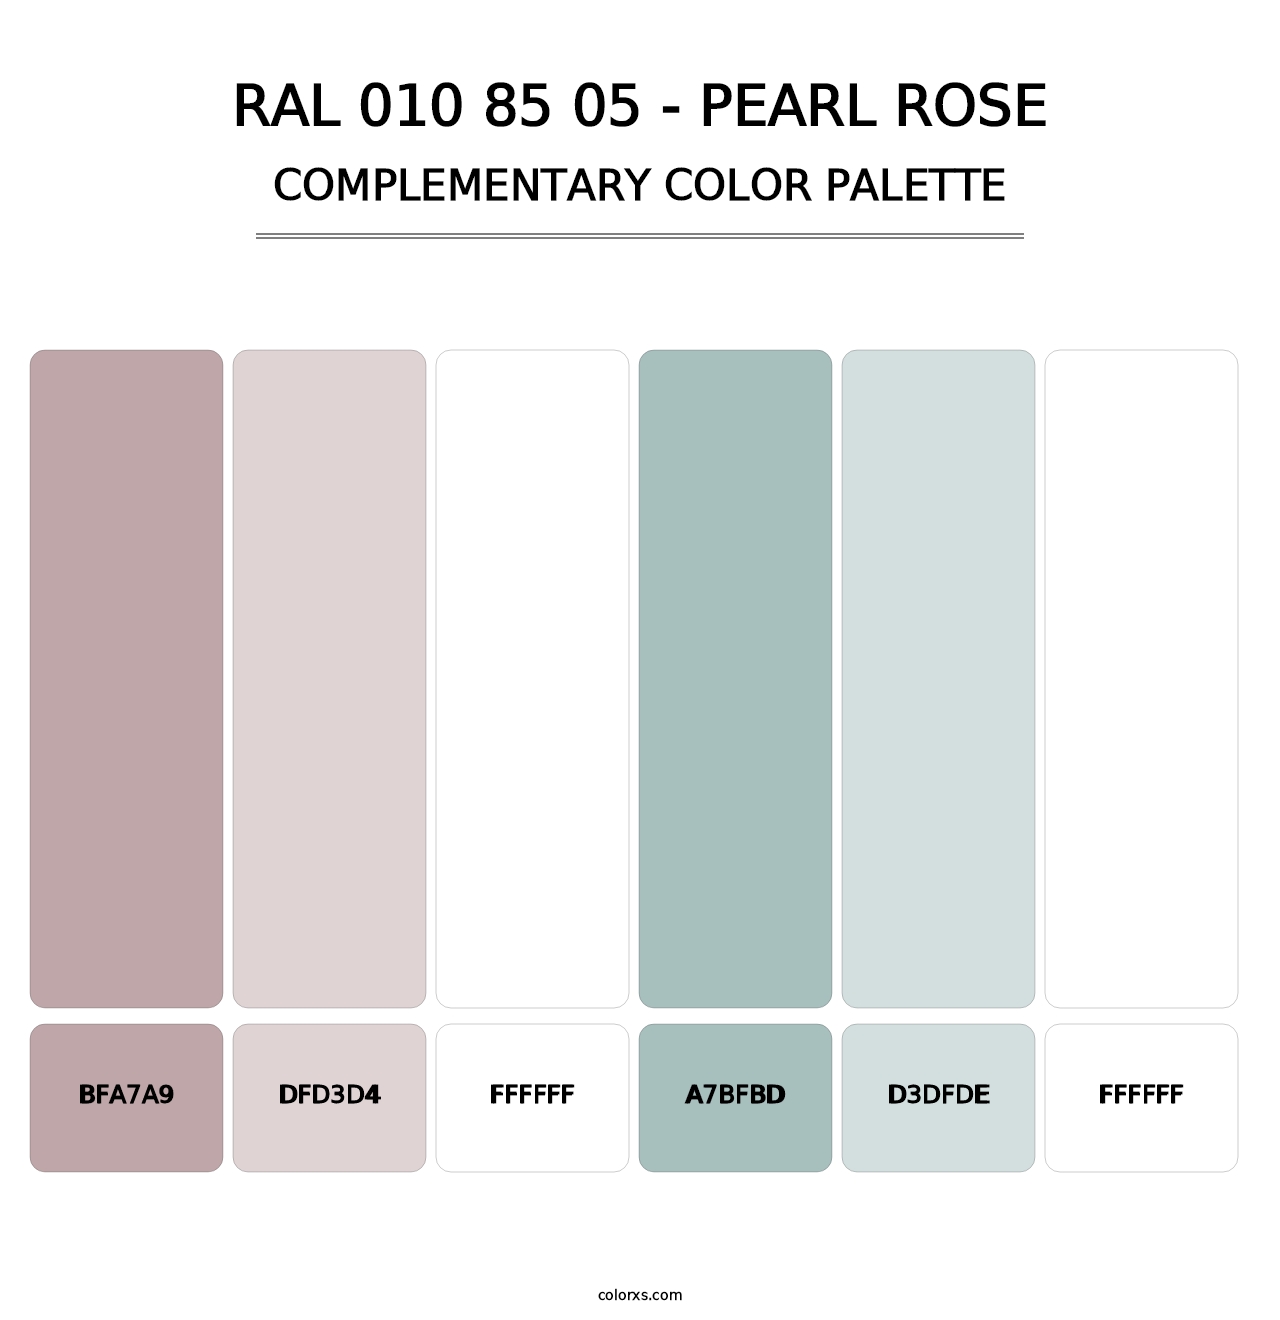 RAL 010 85 05 - Pearl Rose - Complementary Color Palette